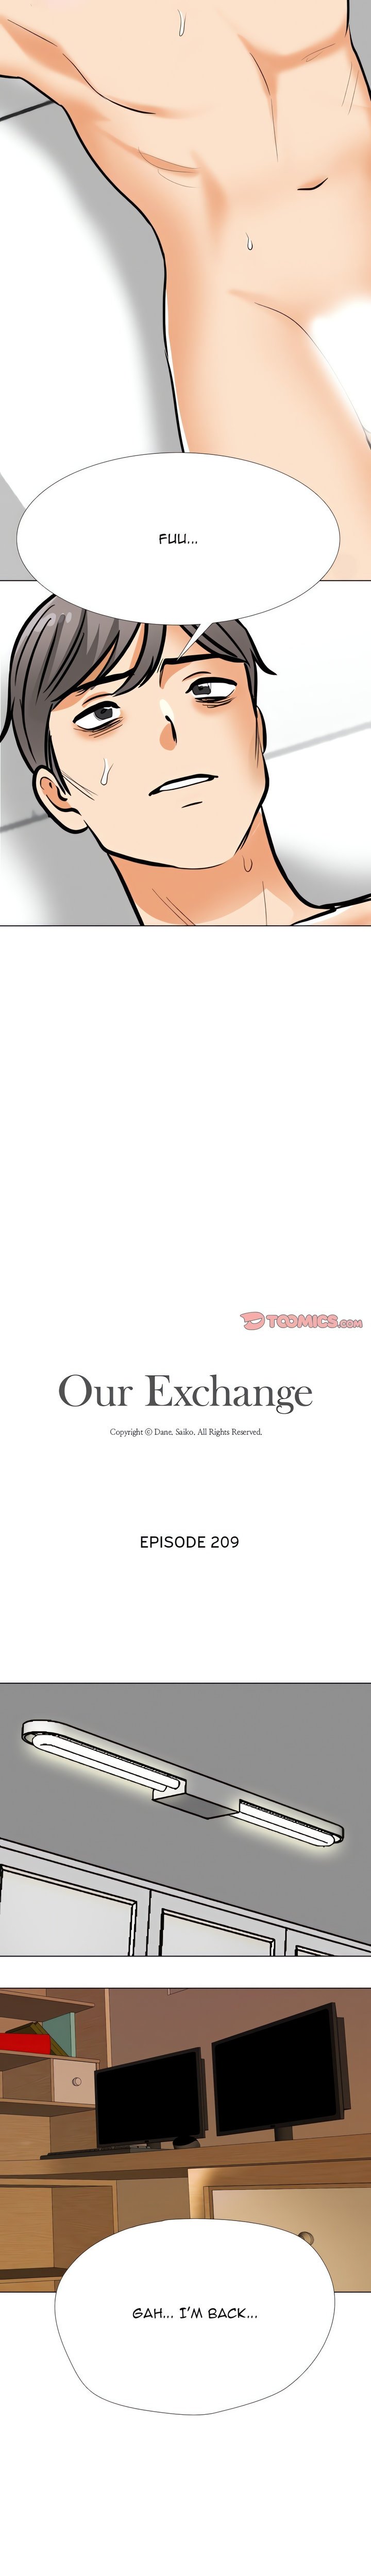 our-exchange-chap-209-1